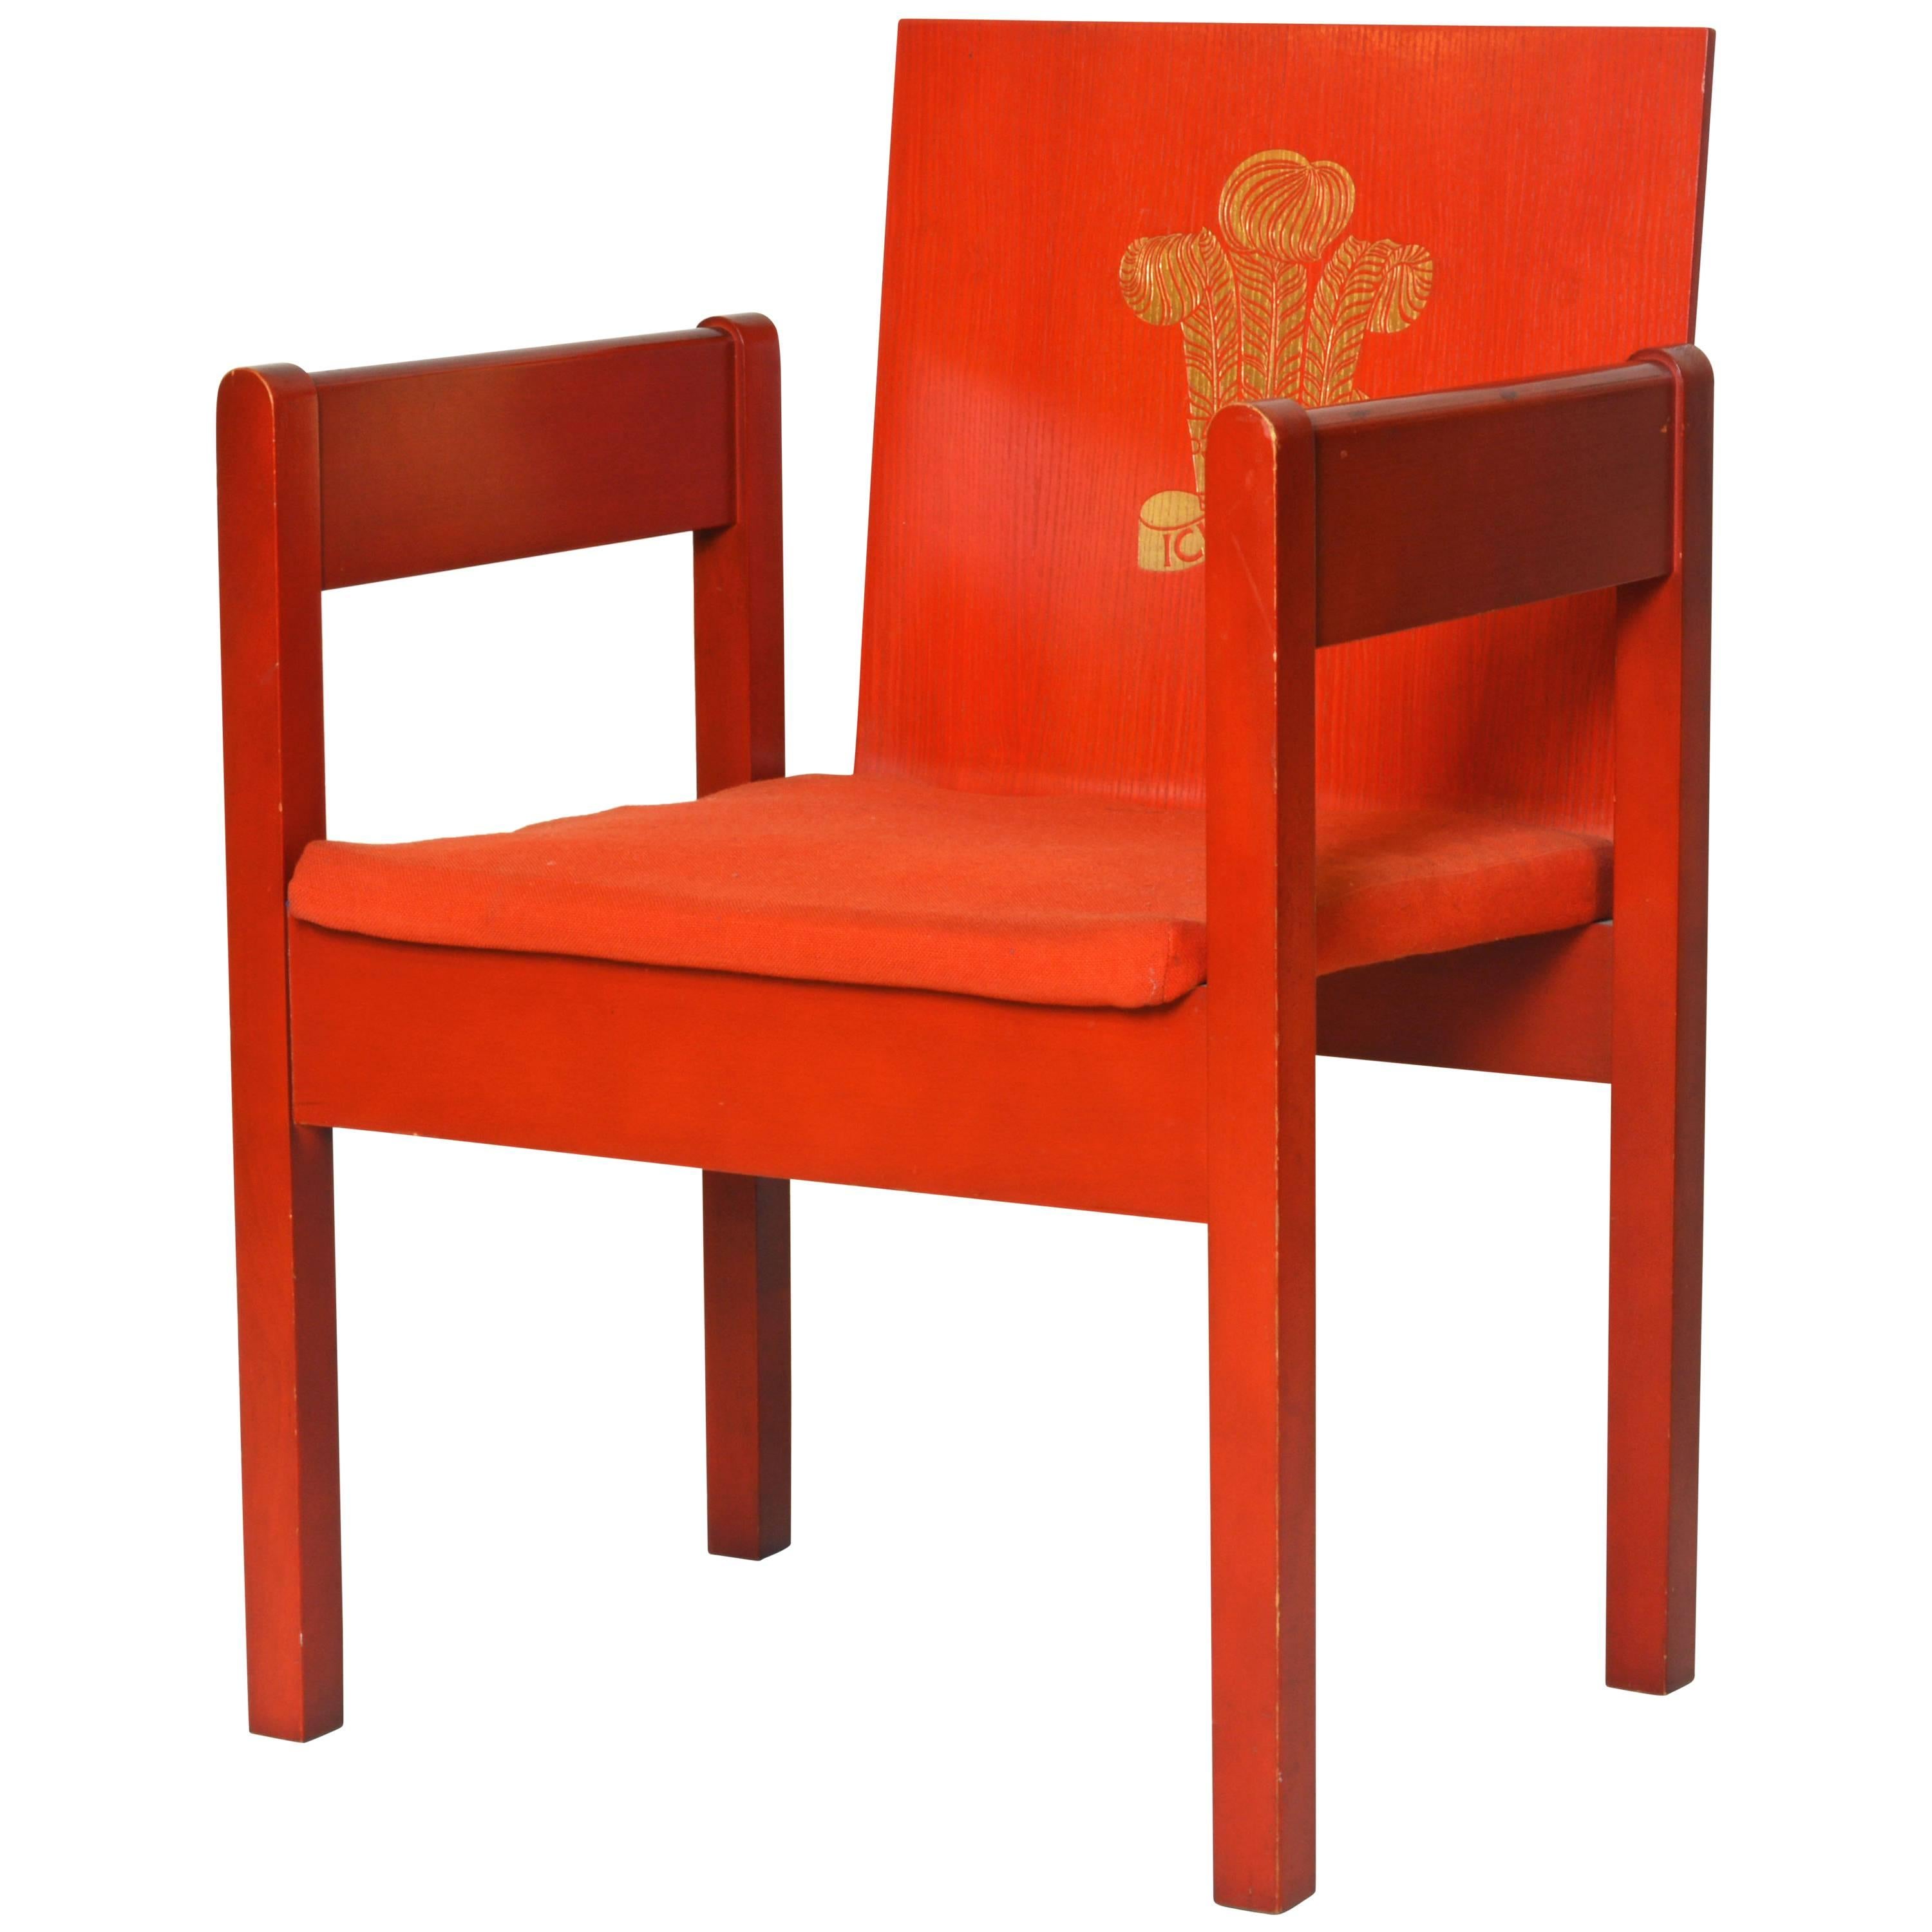 Rare Mid-Century Prince Charles Investiture Chair Designed by Lord Snowdon, 1969